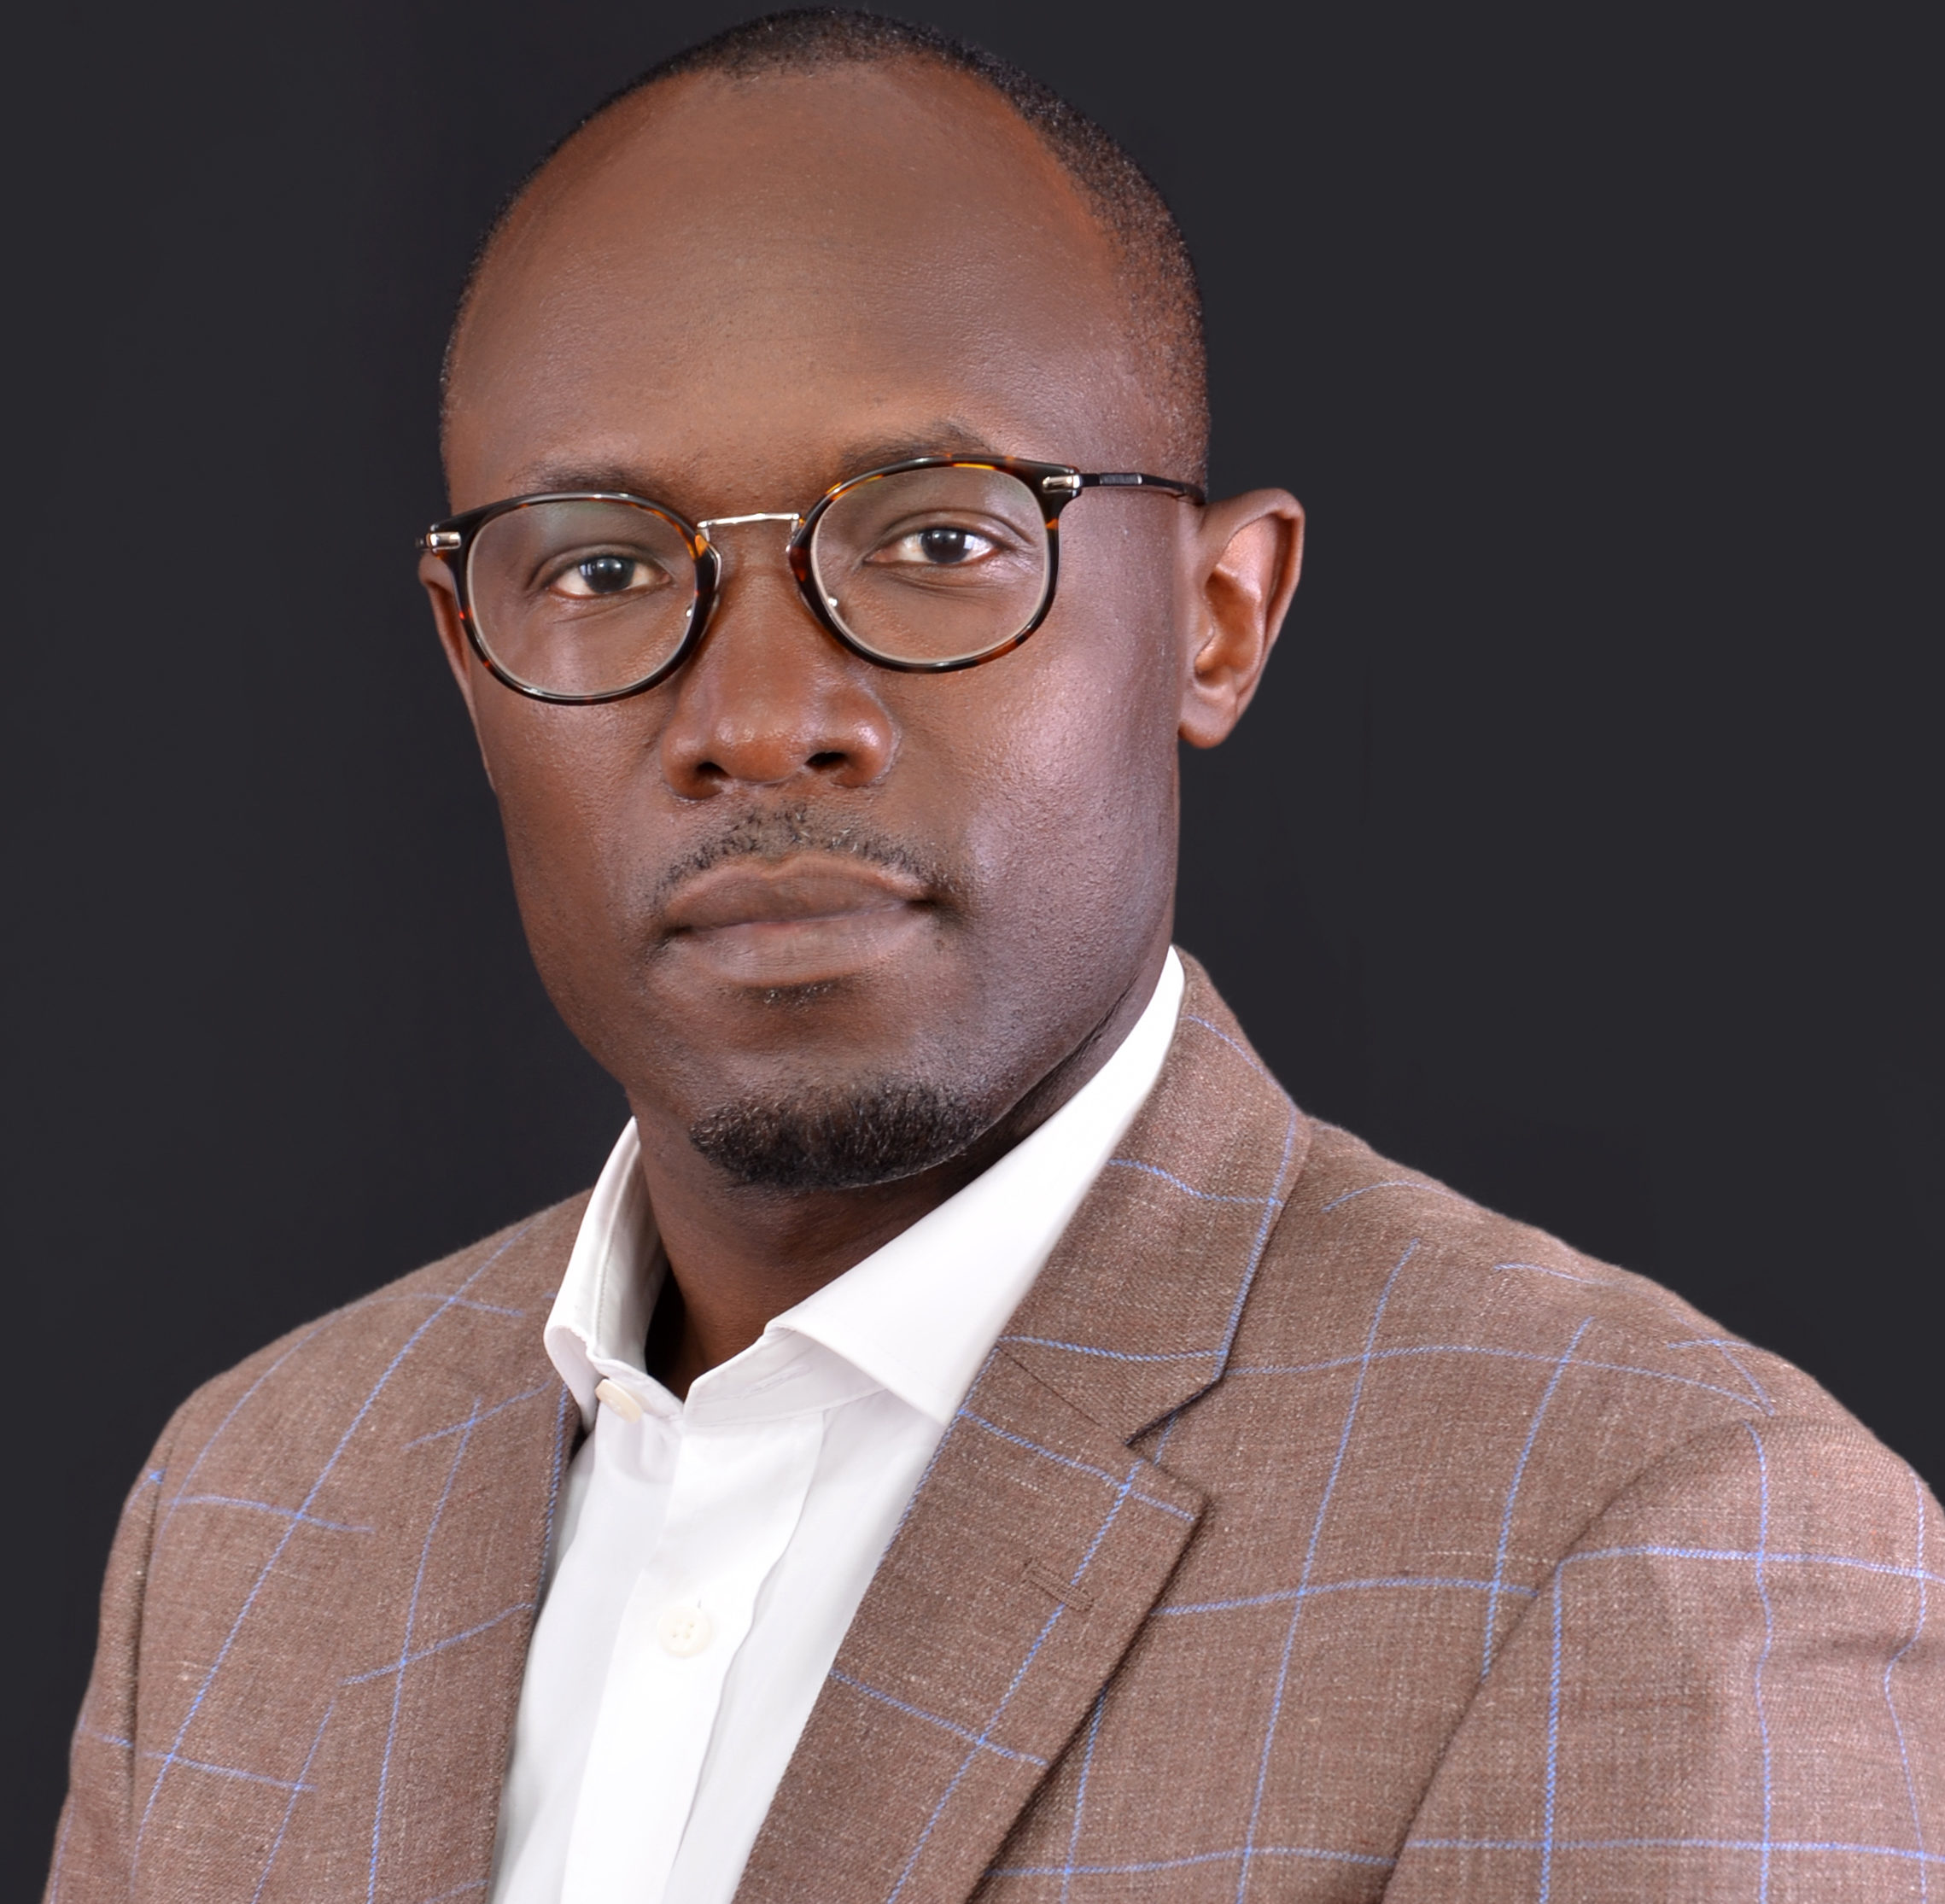 CSquared Appoints Ted Ogonda as Group Director of Cloud Services